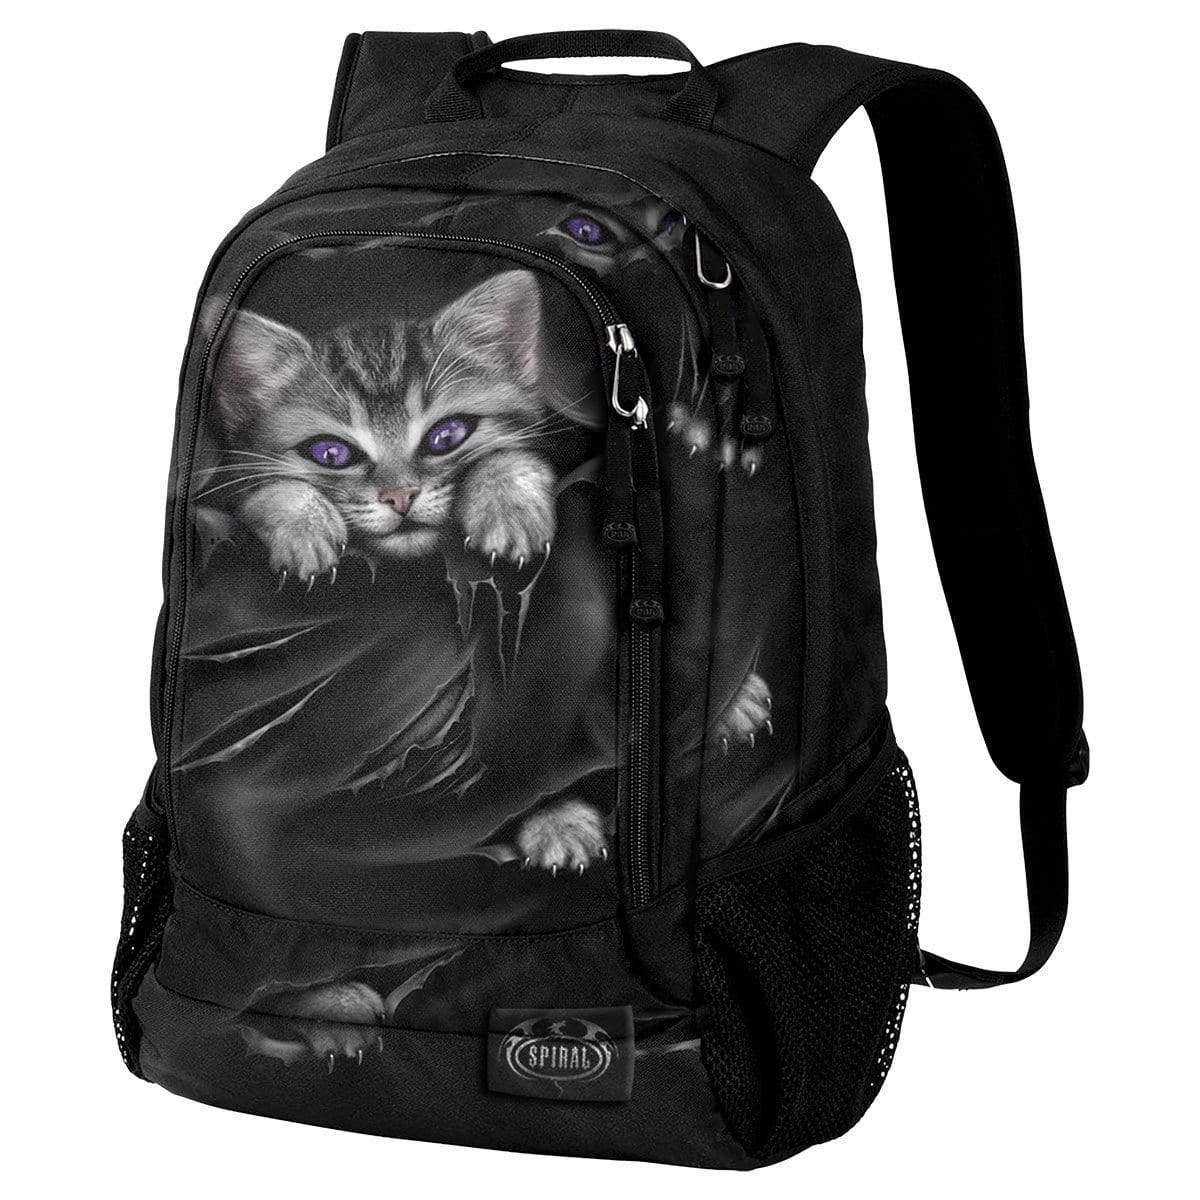 BRIGHT EYES - Back Pack - With Laptop Pocket - Spiral USA